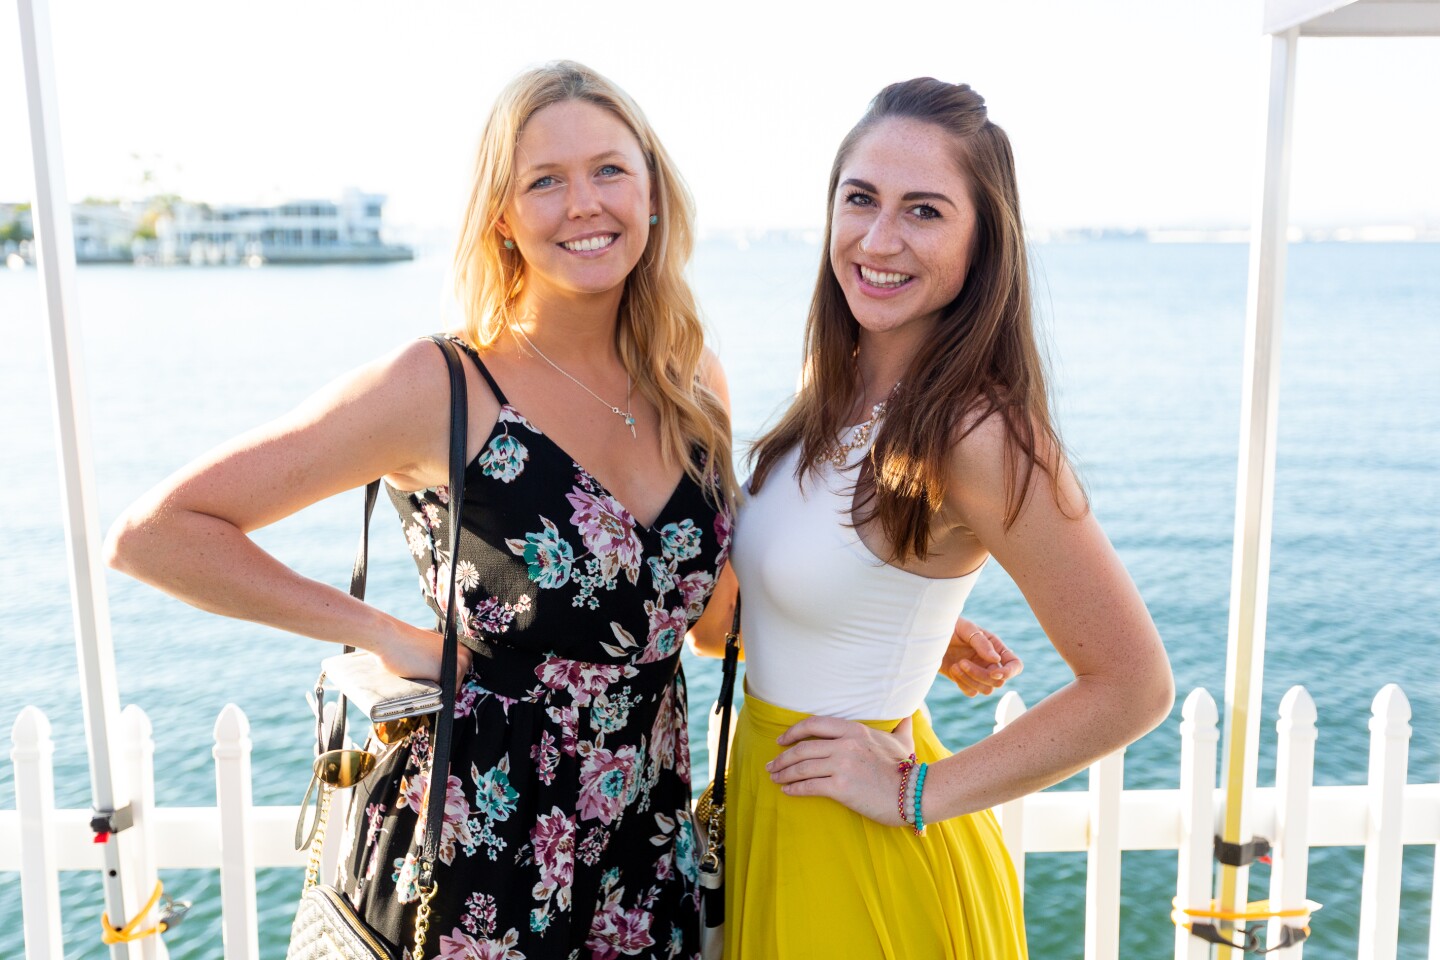 Guests at Wildcoast's Baja Bash celebrated all things Baja California and raised money to help conservation efforts at the Coronado Cays Yacht Club on Saturday, June 22, 2019.